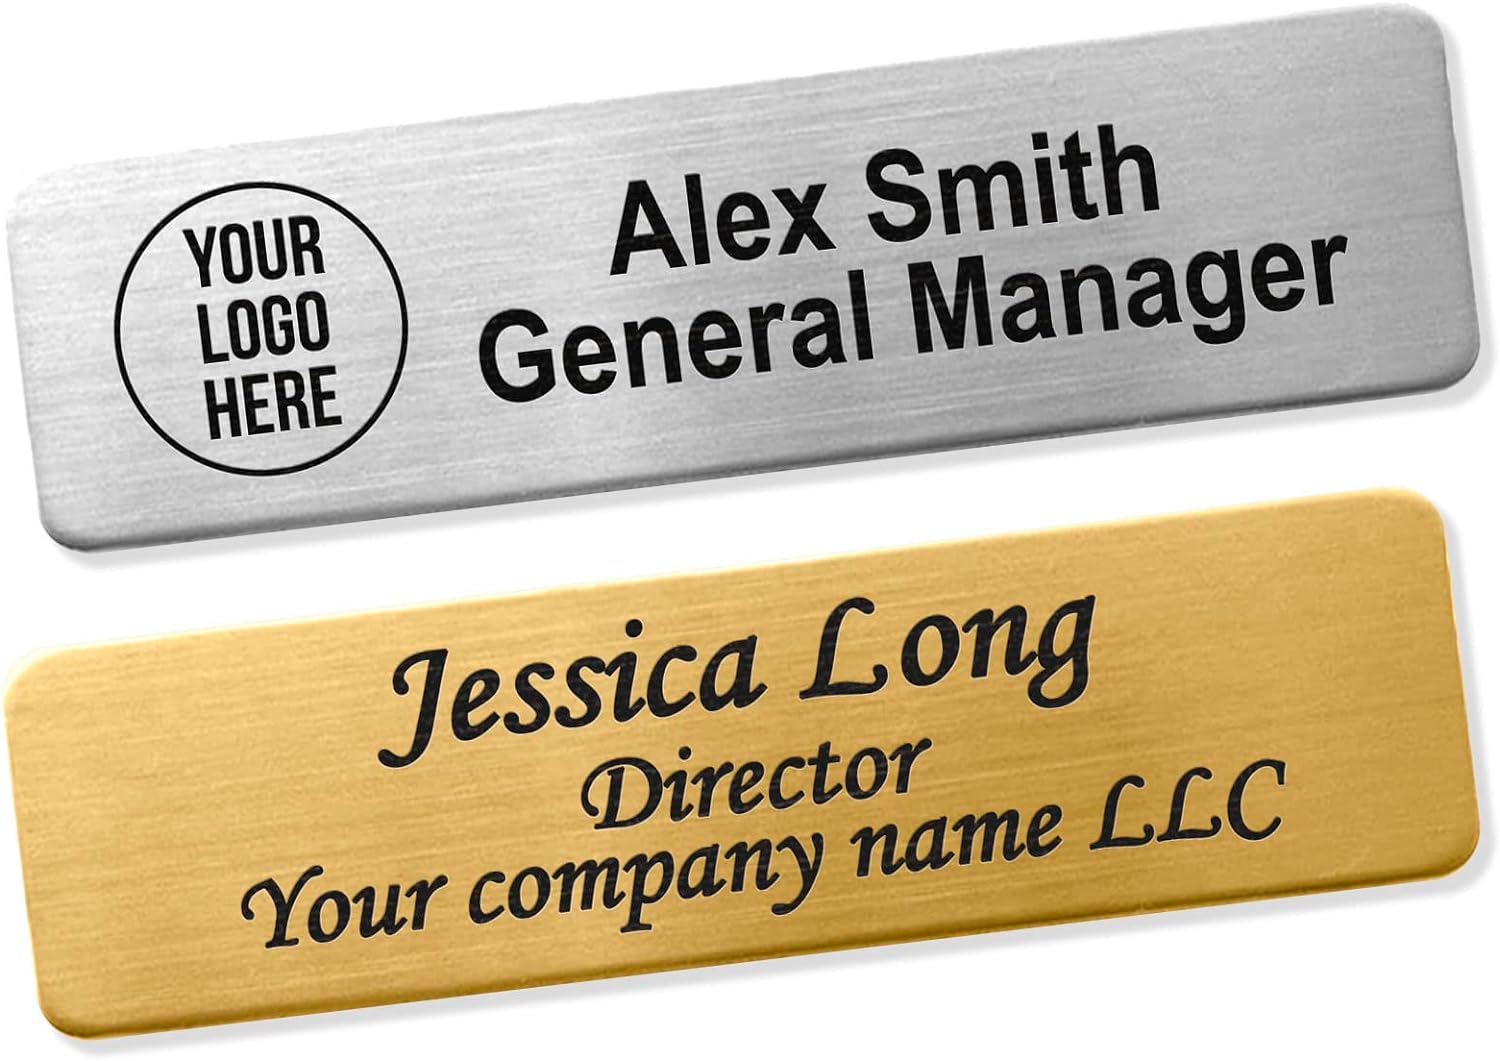 Custom Engraved Name Tag Badges – Personalized Identification with Pin or Magnetic Backing, 1 Inch x 3 Inches